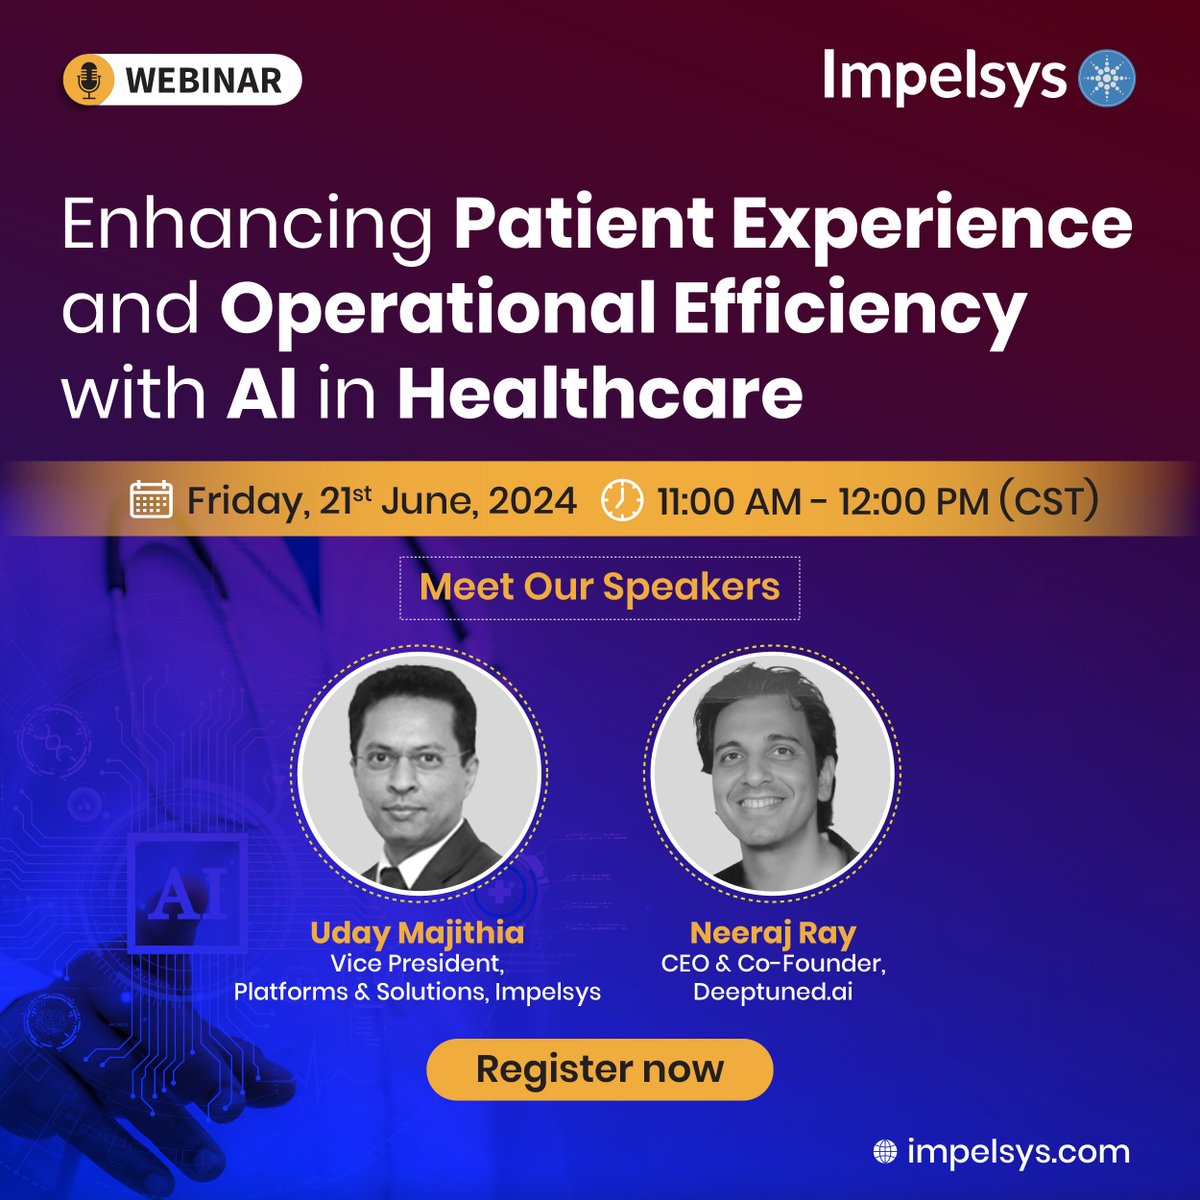 Join us for an exclusive webinar on 'Enhancing Patient Experience and Operational Efficiency with #AIInHealthcare.' Learn how #AI accelerates patient-care, transforms operations, and revolutionizes #healthcaredelivery. 
Register now at impelsys.com/webinars/enhan…
#Impelsys #AI